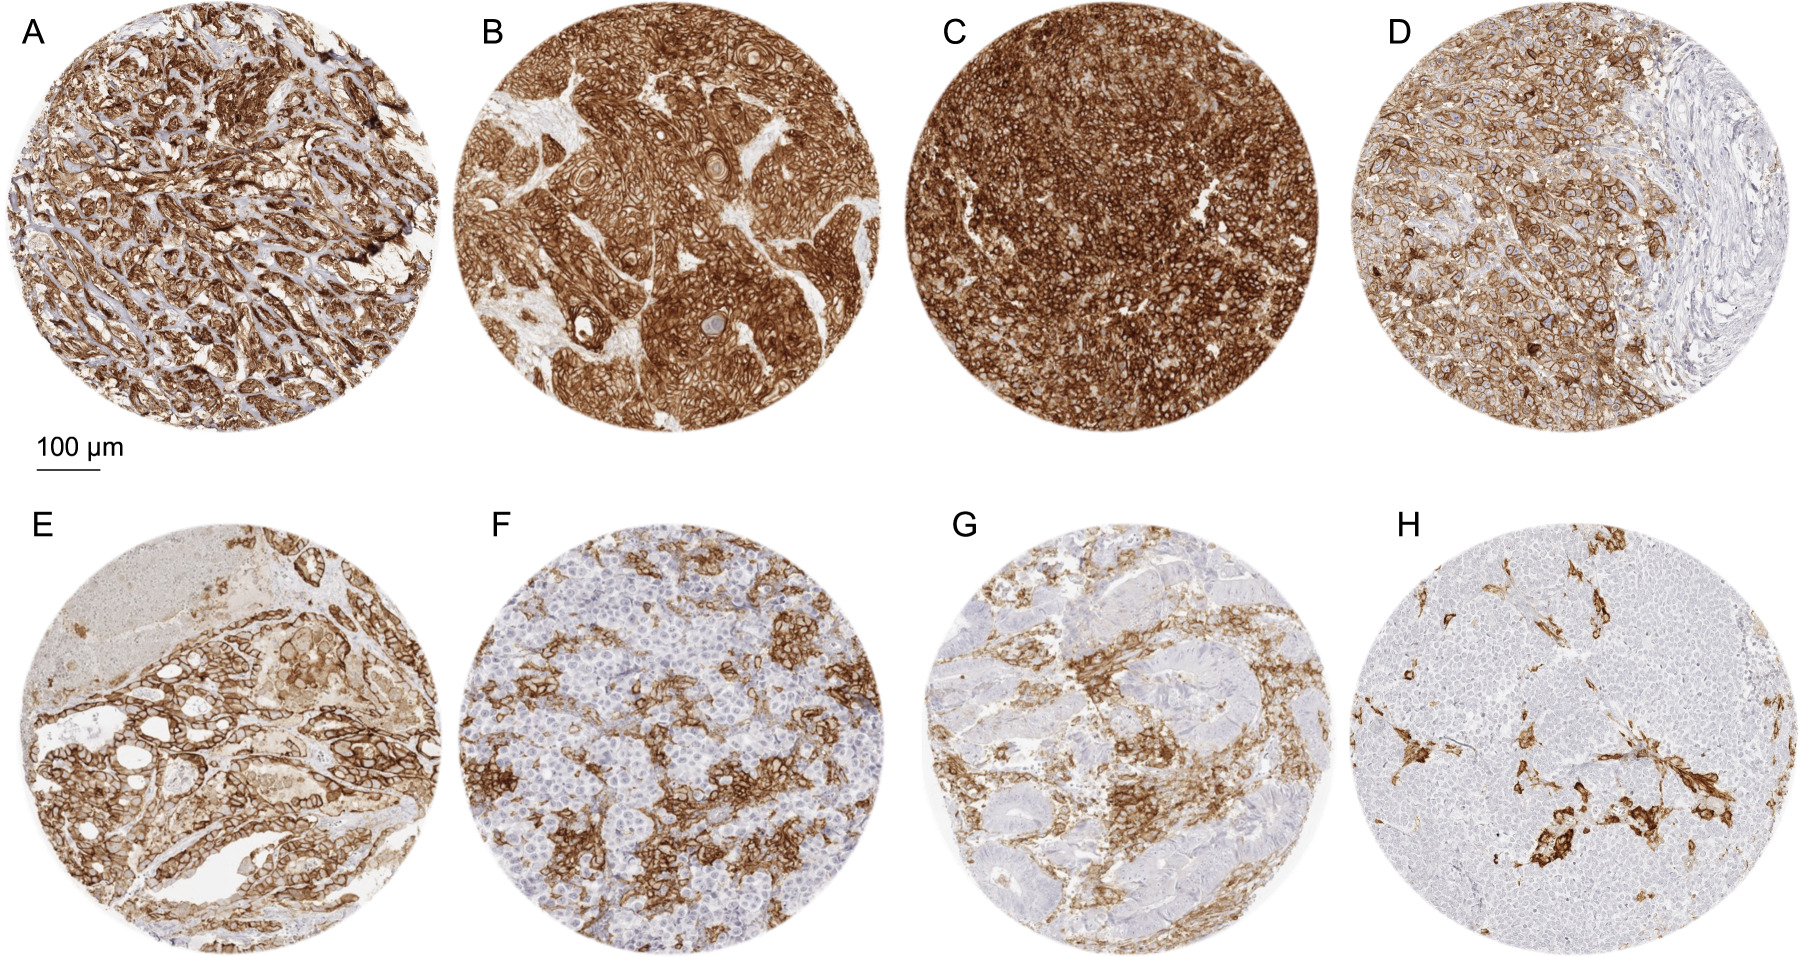 PD-L1 immunostaining in cancer using MSVA-711R. The panels show a strong, predominantly membranous PD-L1 immunostaining of tumor cells in an epitheloid malignant mesothelioma (A), a muscle-invasive urothelial carcinoma (B), a squamous cell carcinoma of the oral cavity (C), and an anaplastic thyroid cancer (D). A papillary carcinoma of the thyroid shows a membranous staining of both cancer cells (strong intensity) and macrophages (moderate intensity) (E). Cases of seminoma (F), colorectal adenocarcinoma (G), and a Merkel cell carcinoma of the skin (H) do not show tumor cell staining but contain macrophages with intense PD-L1 positivity.